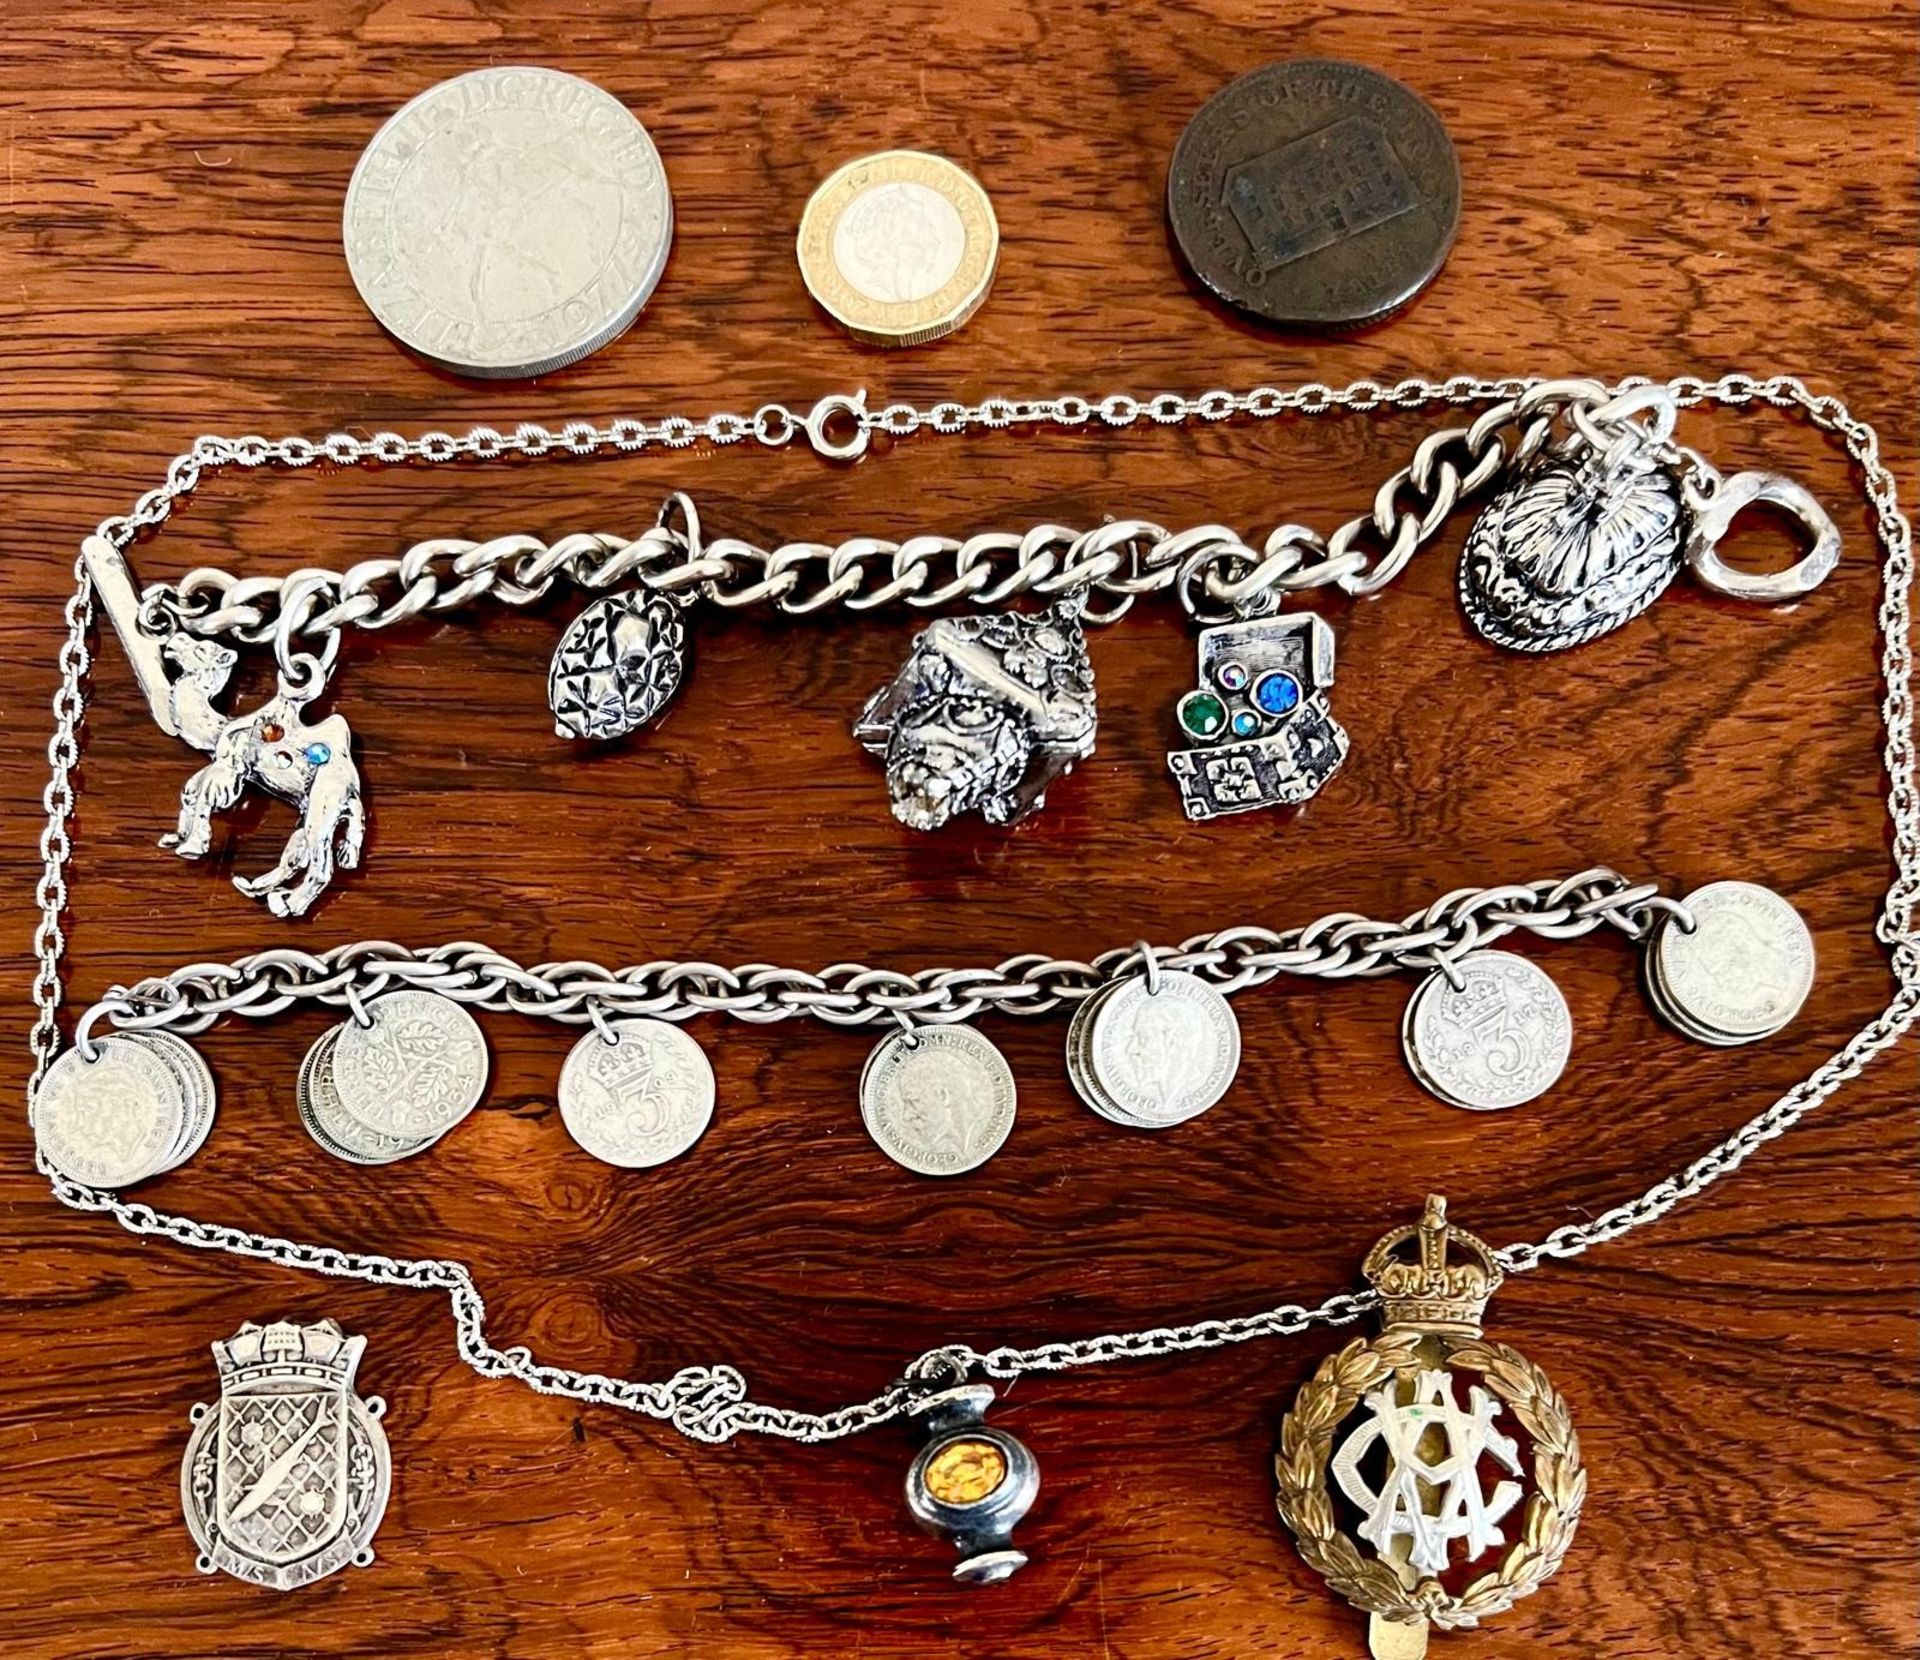 SILVER COLOURED METAL BRACELET, SILVER COLOURED CHAIN AND PENDANT, OVERSEER'S TOKEN ETC